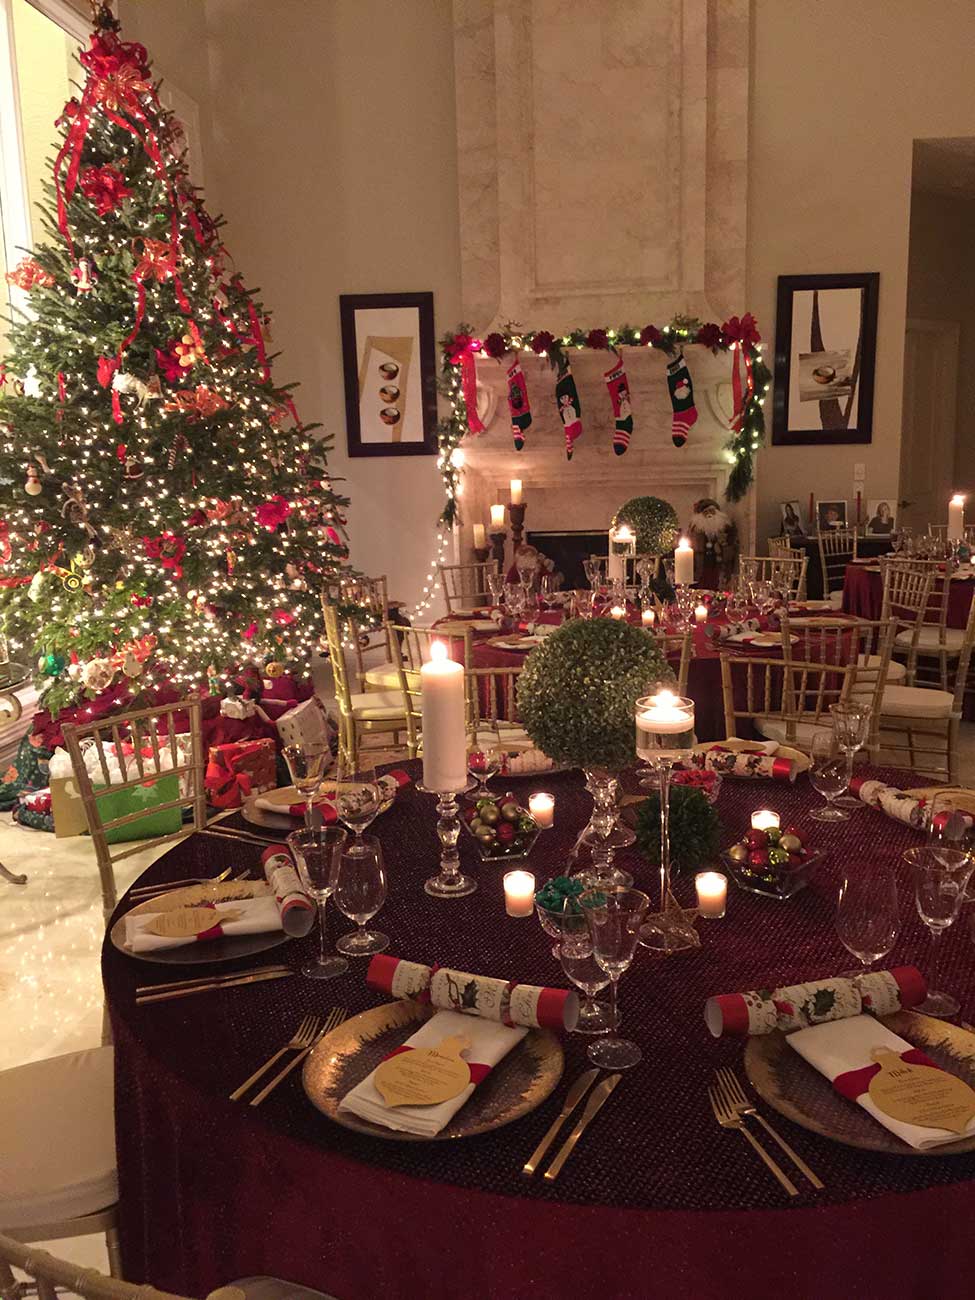 Tabletop Christmas dinner design with silverware, dinnerware and a Christmas tree in the background